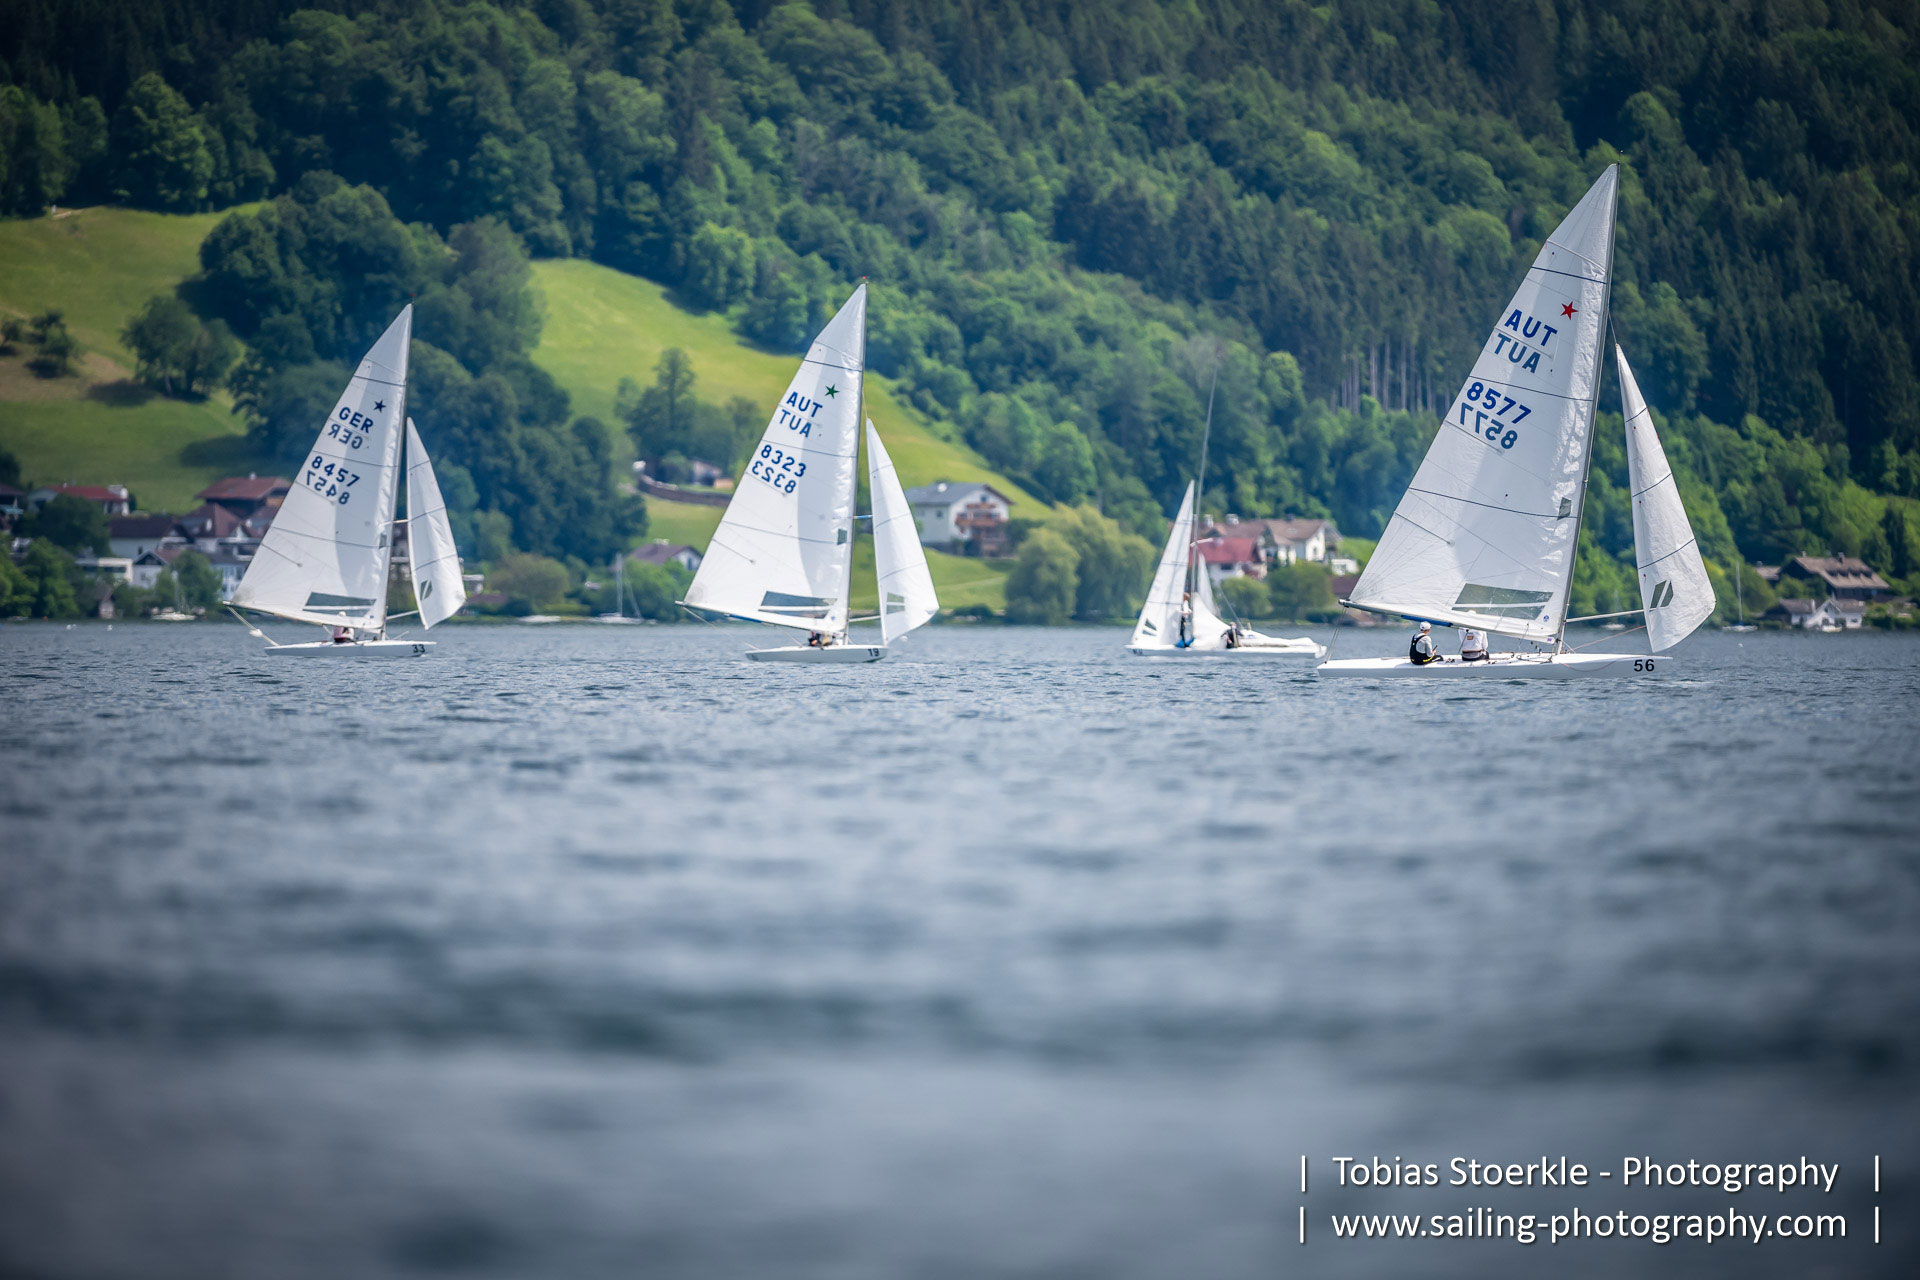  Star  European Championship  Attersee AUT  Day 2